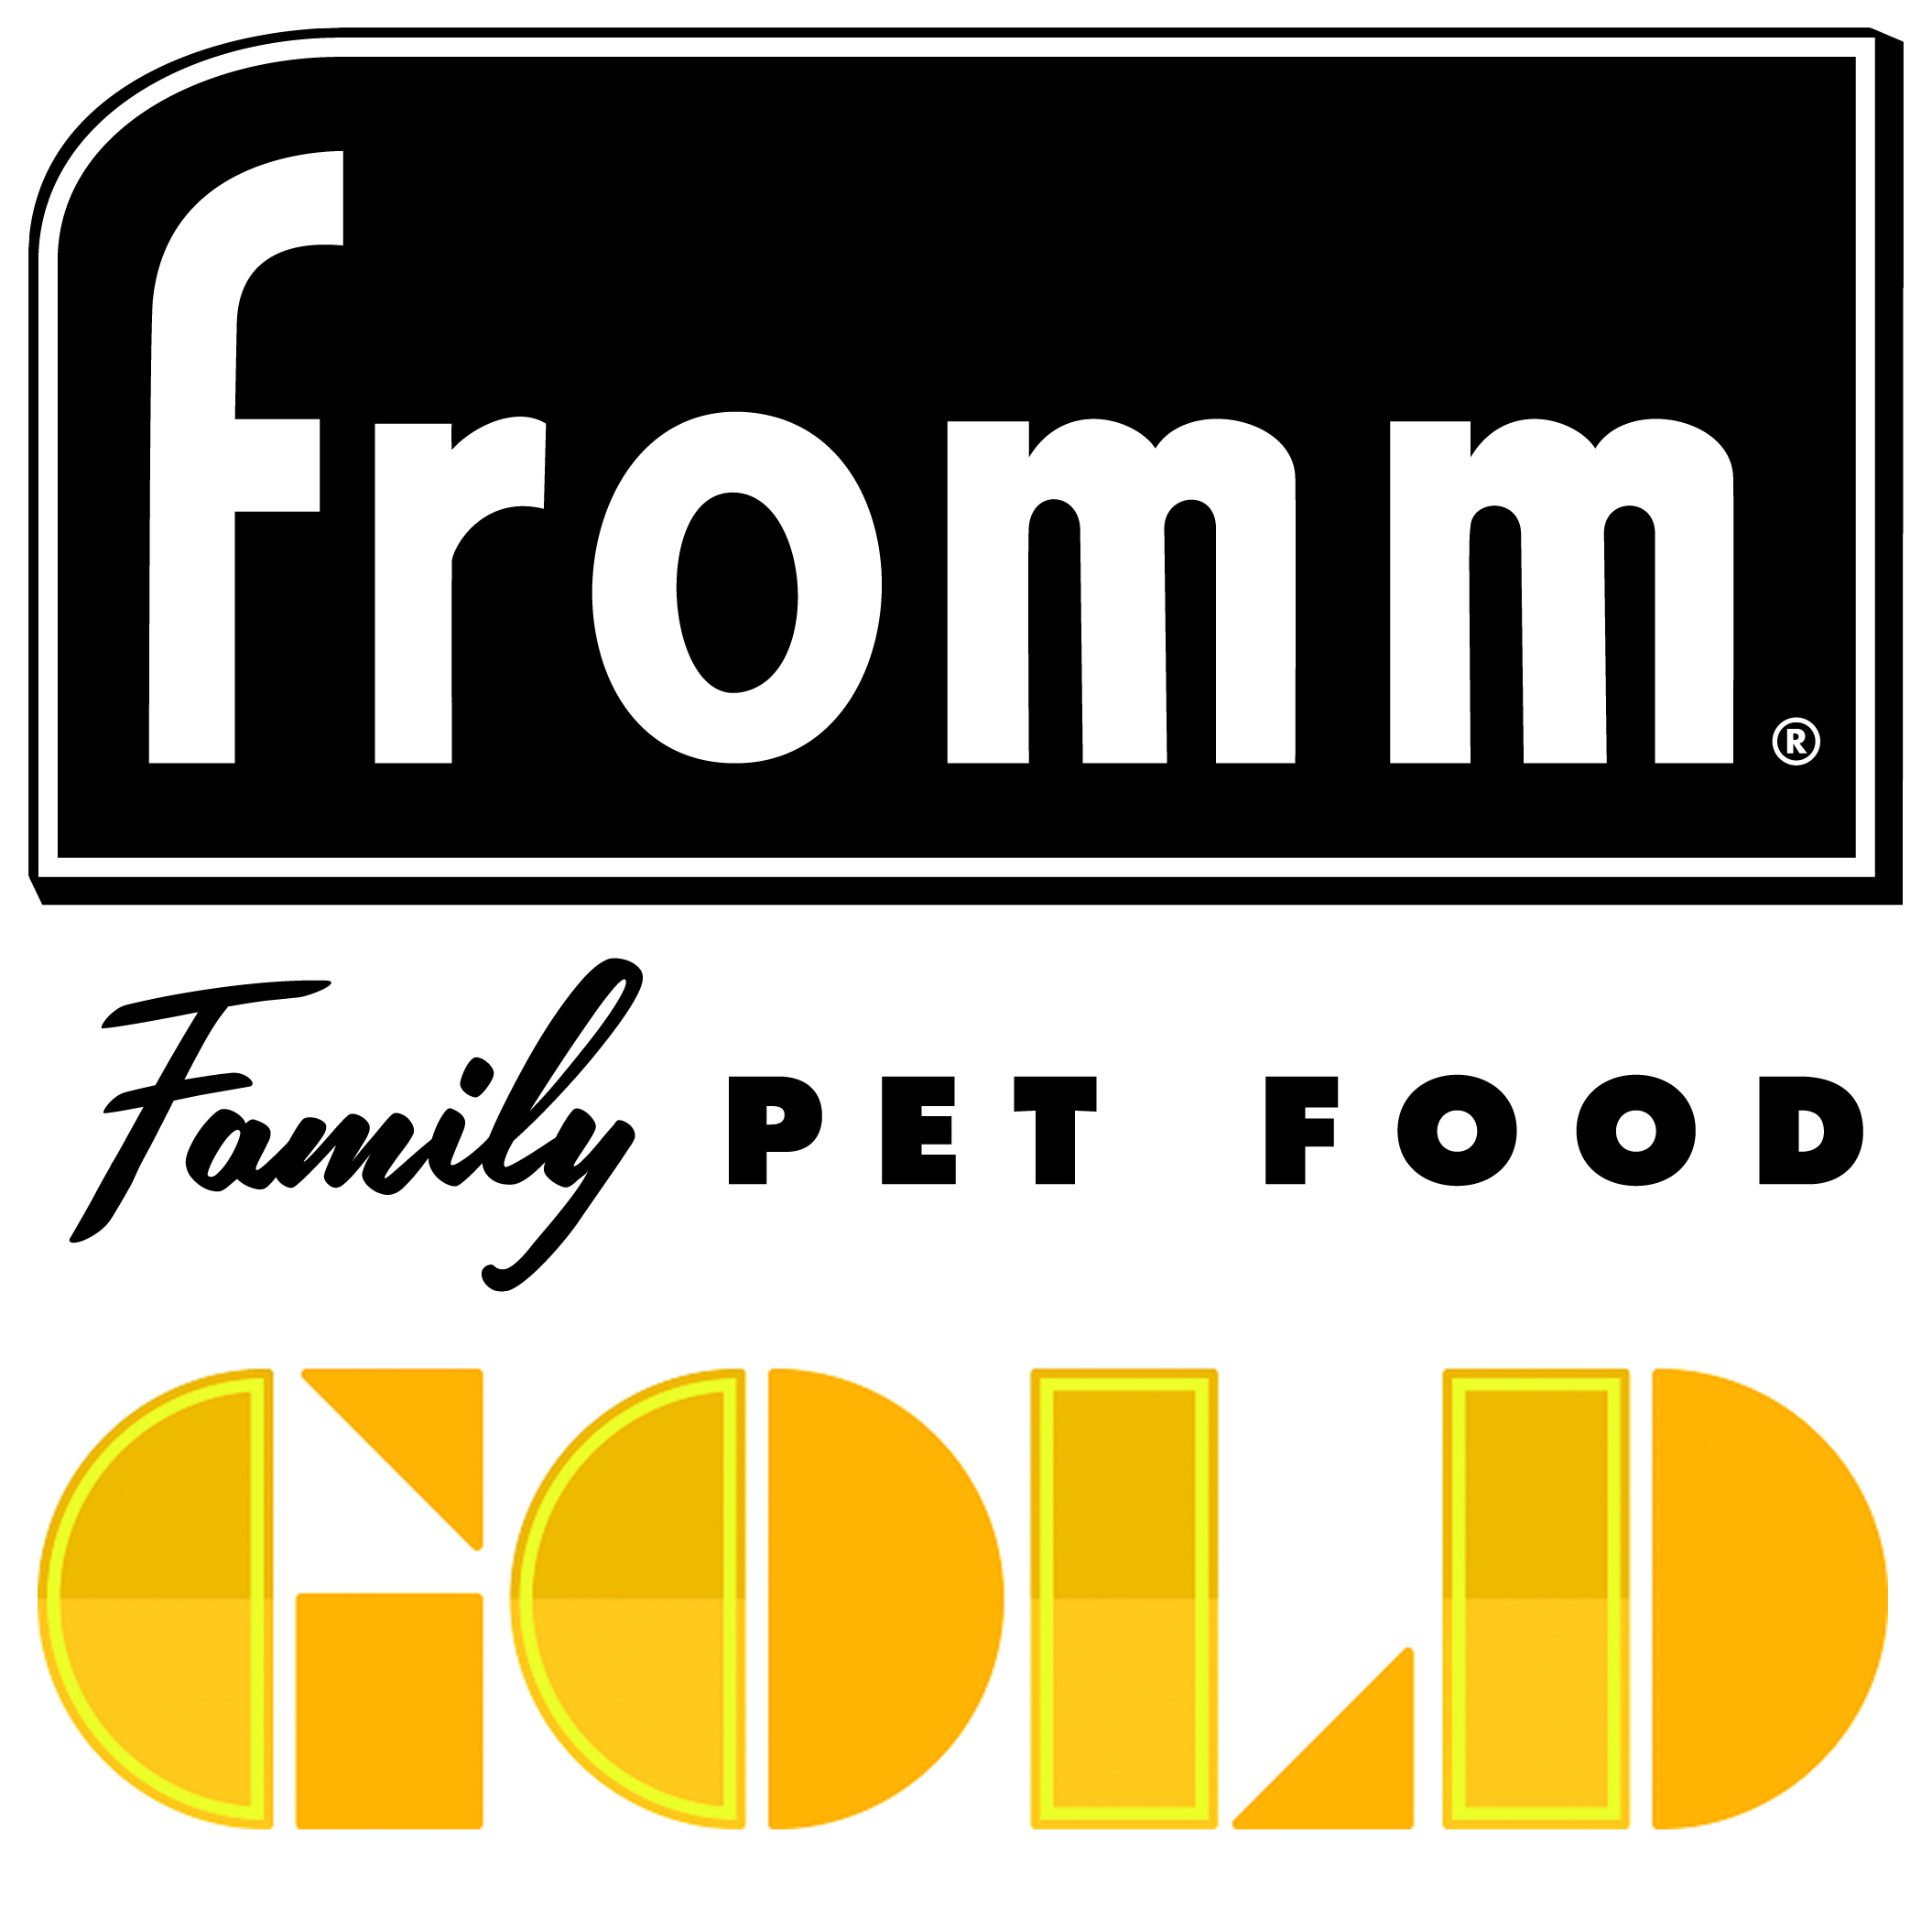 fromm gold small breed